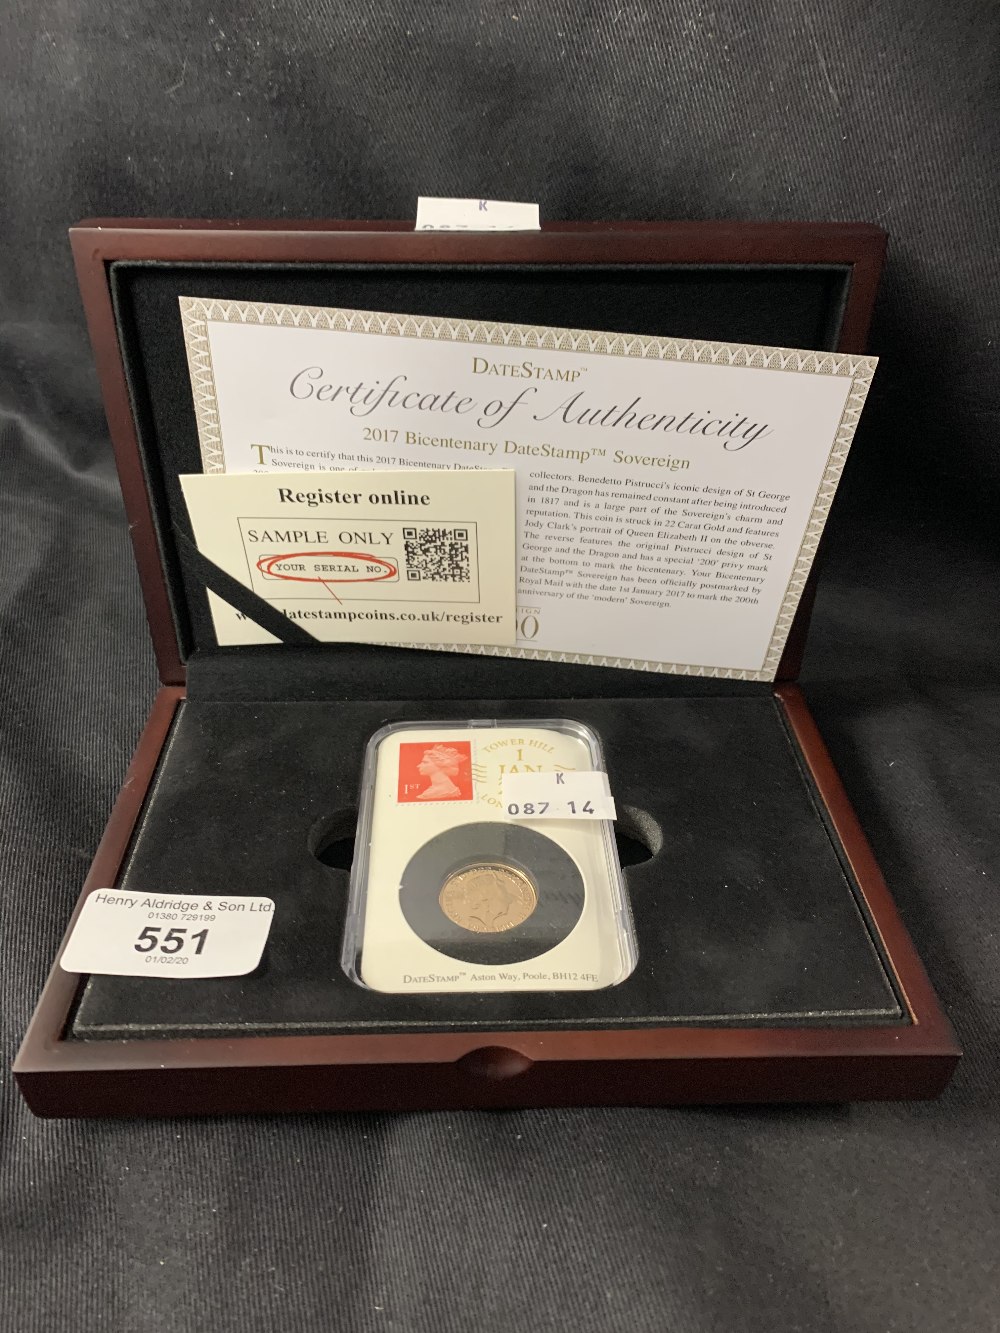 Coins: Gold proof Sovereign 2017 Bicentenary of Postal Date Stamps Commemorative.